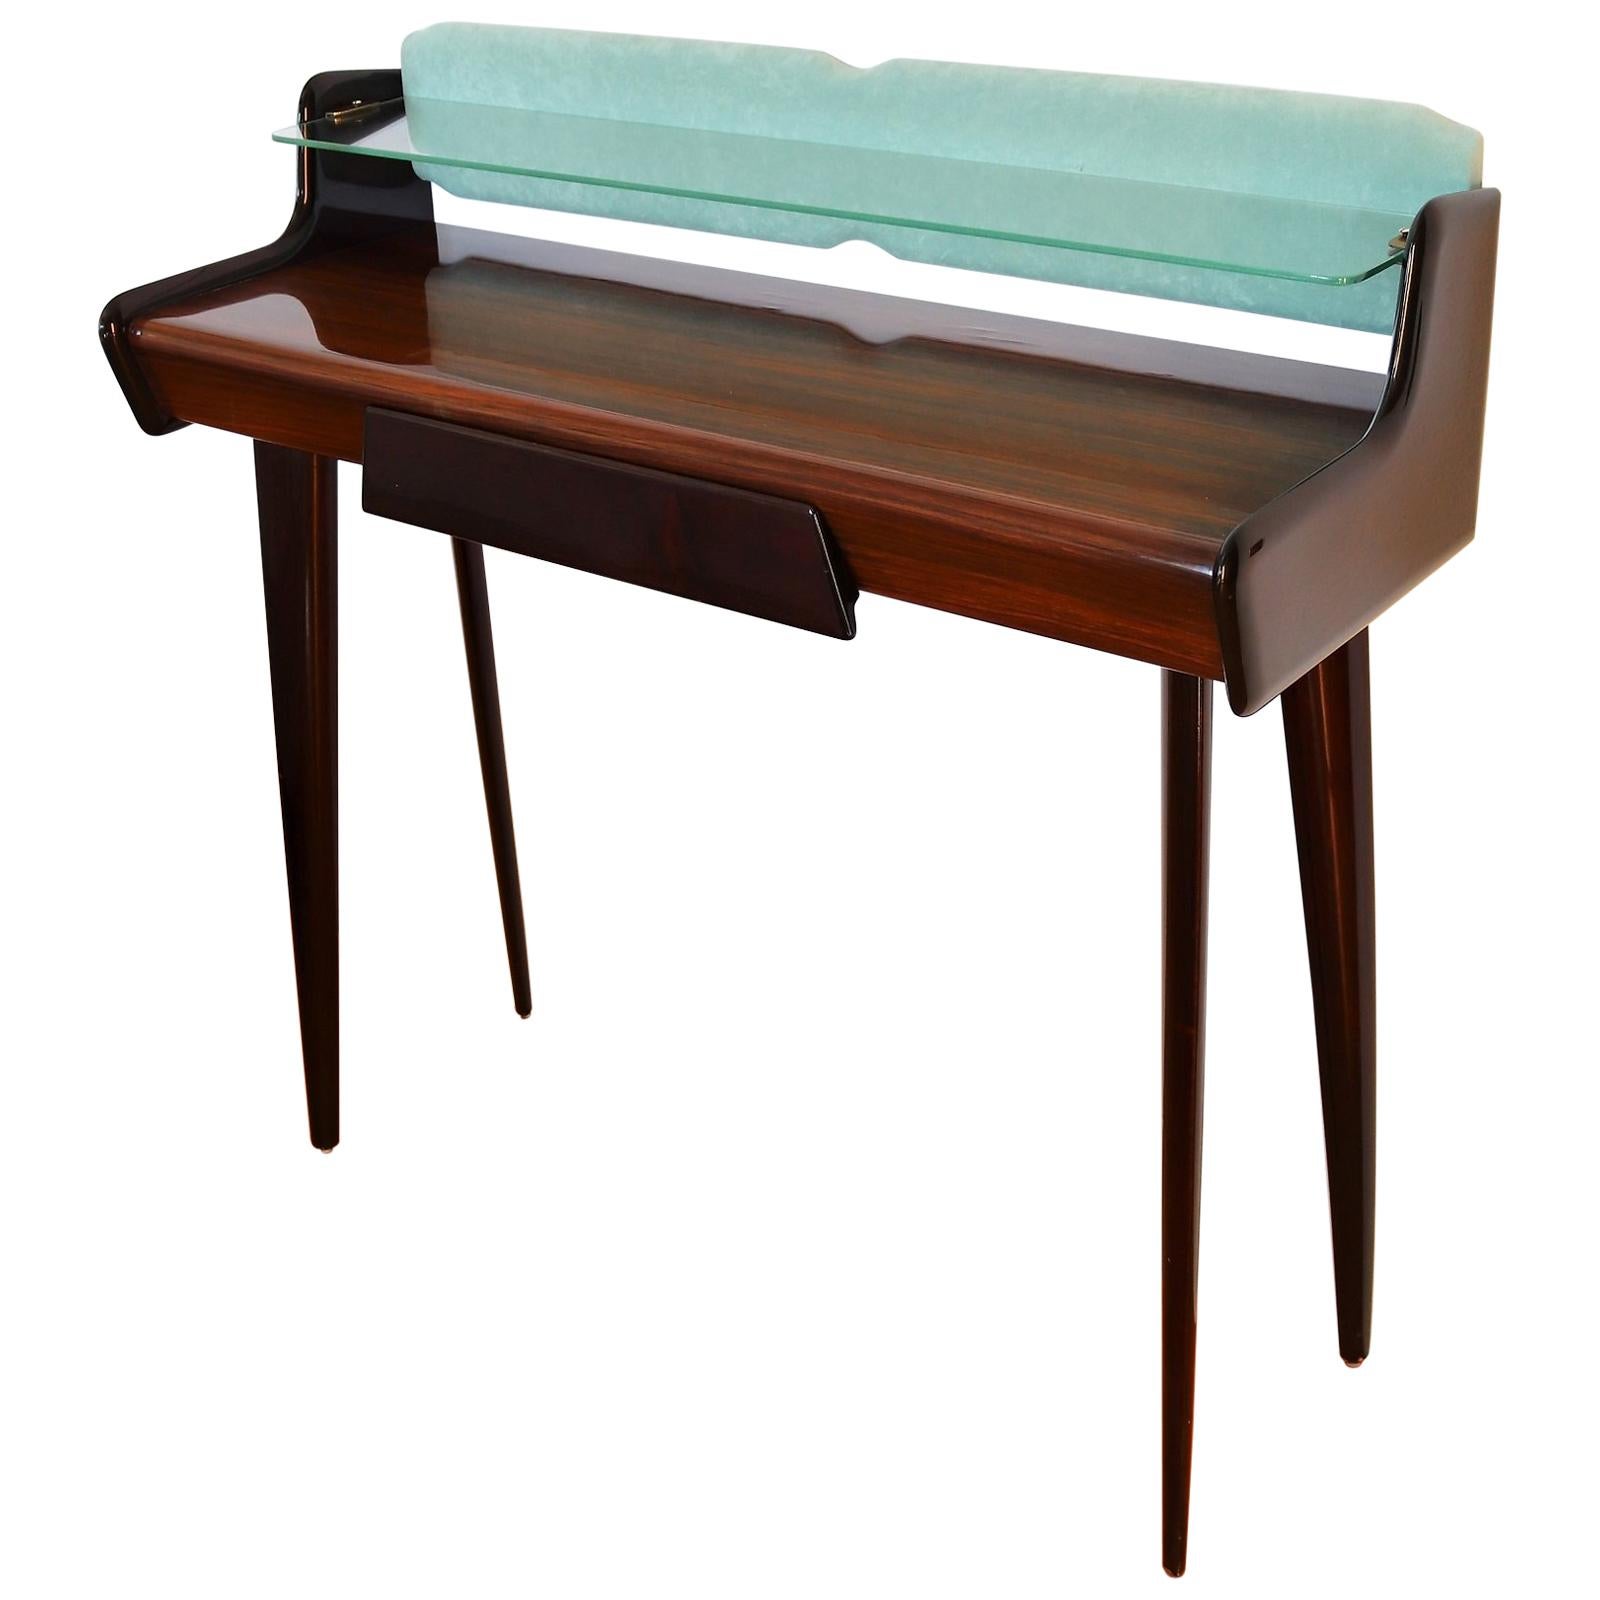 Italian Midcentury Console Design Table in Mahogany and Maple, 1950s